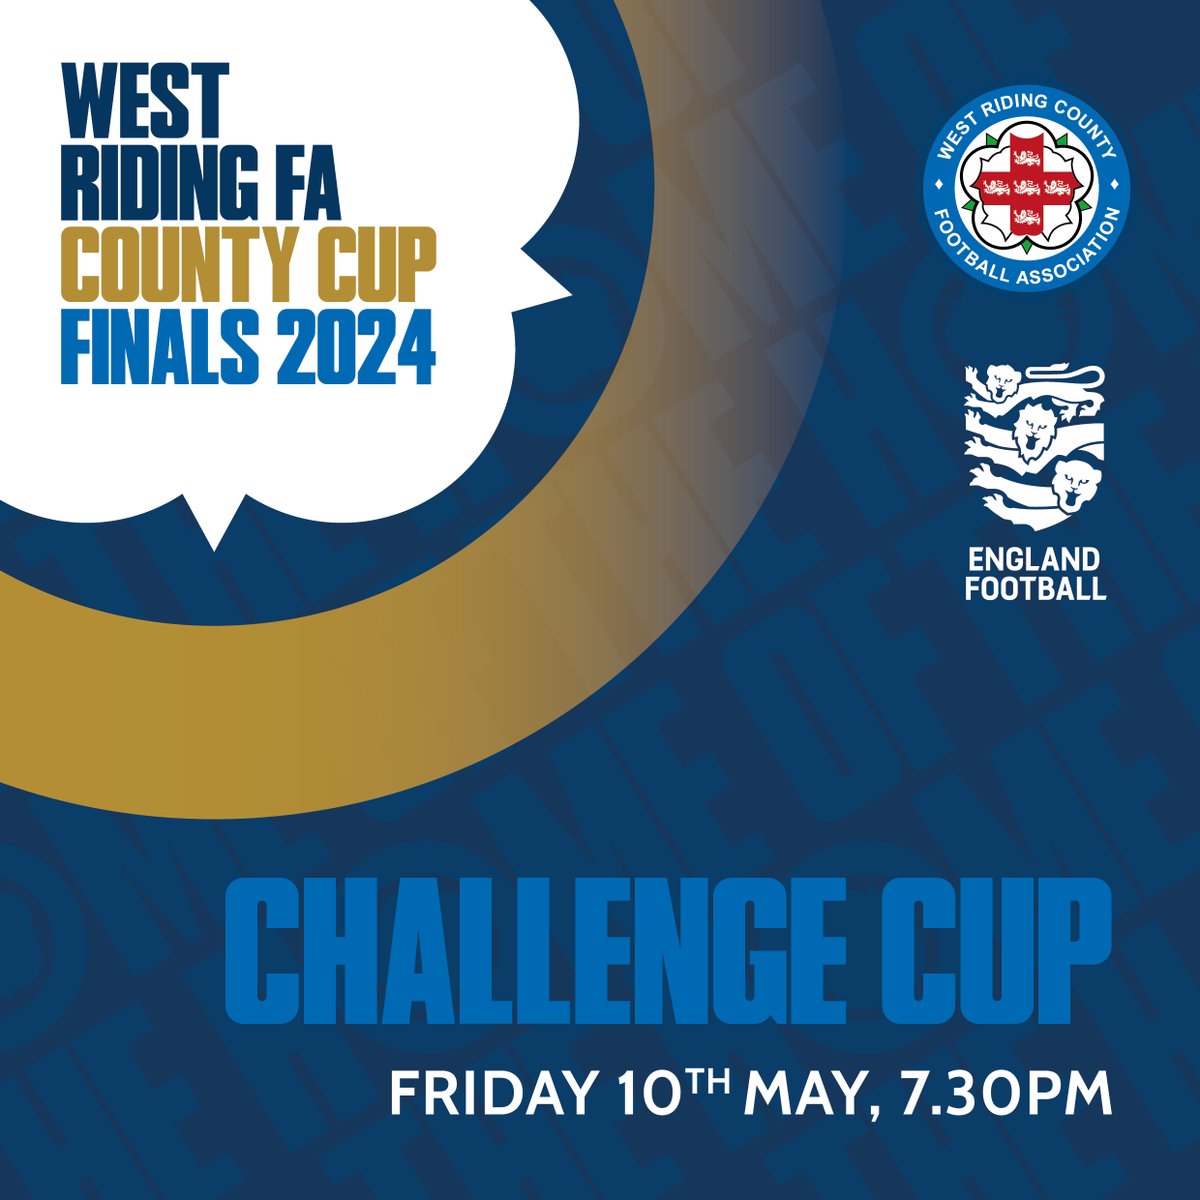 Join us at Fleet Lane tongiht for our Challenge Cup Final between @UltimateFCA and #Linthwaiteathletic Gates open at 6:30pm Adults £5 Concessions £2